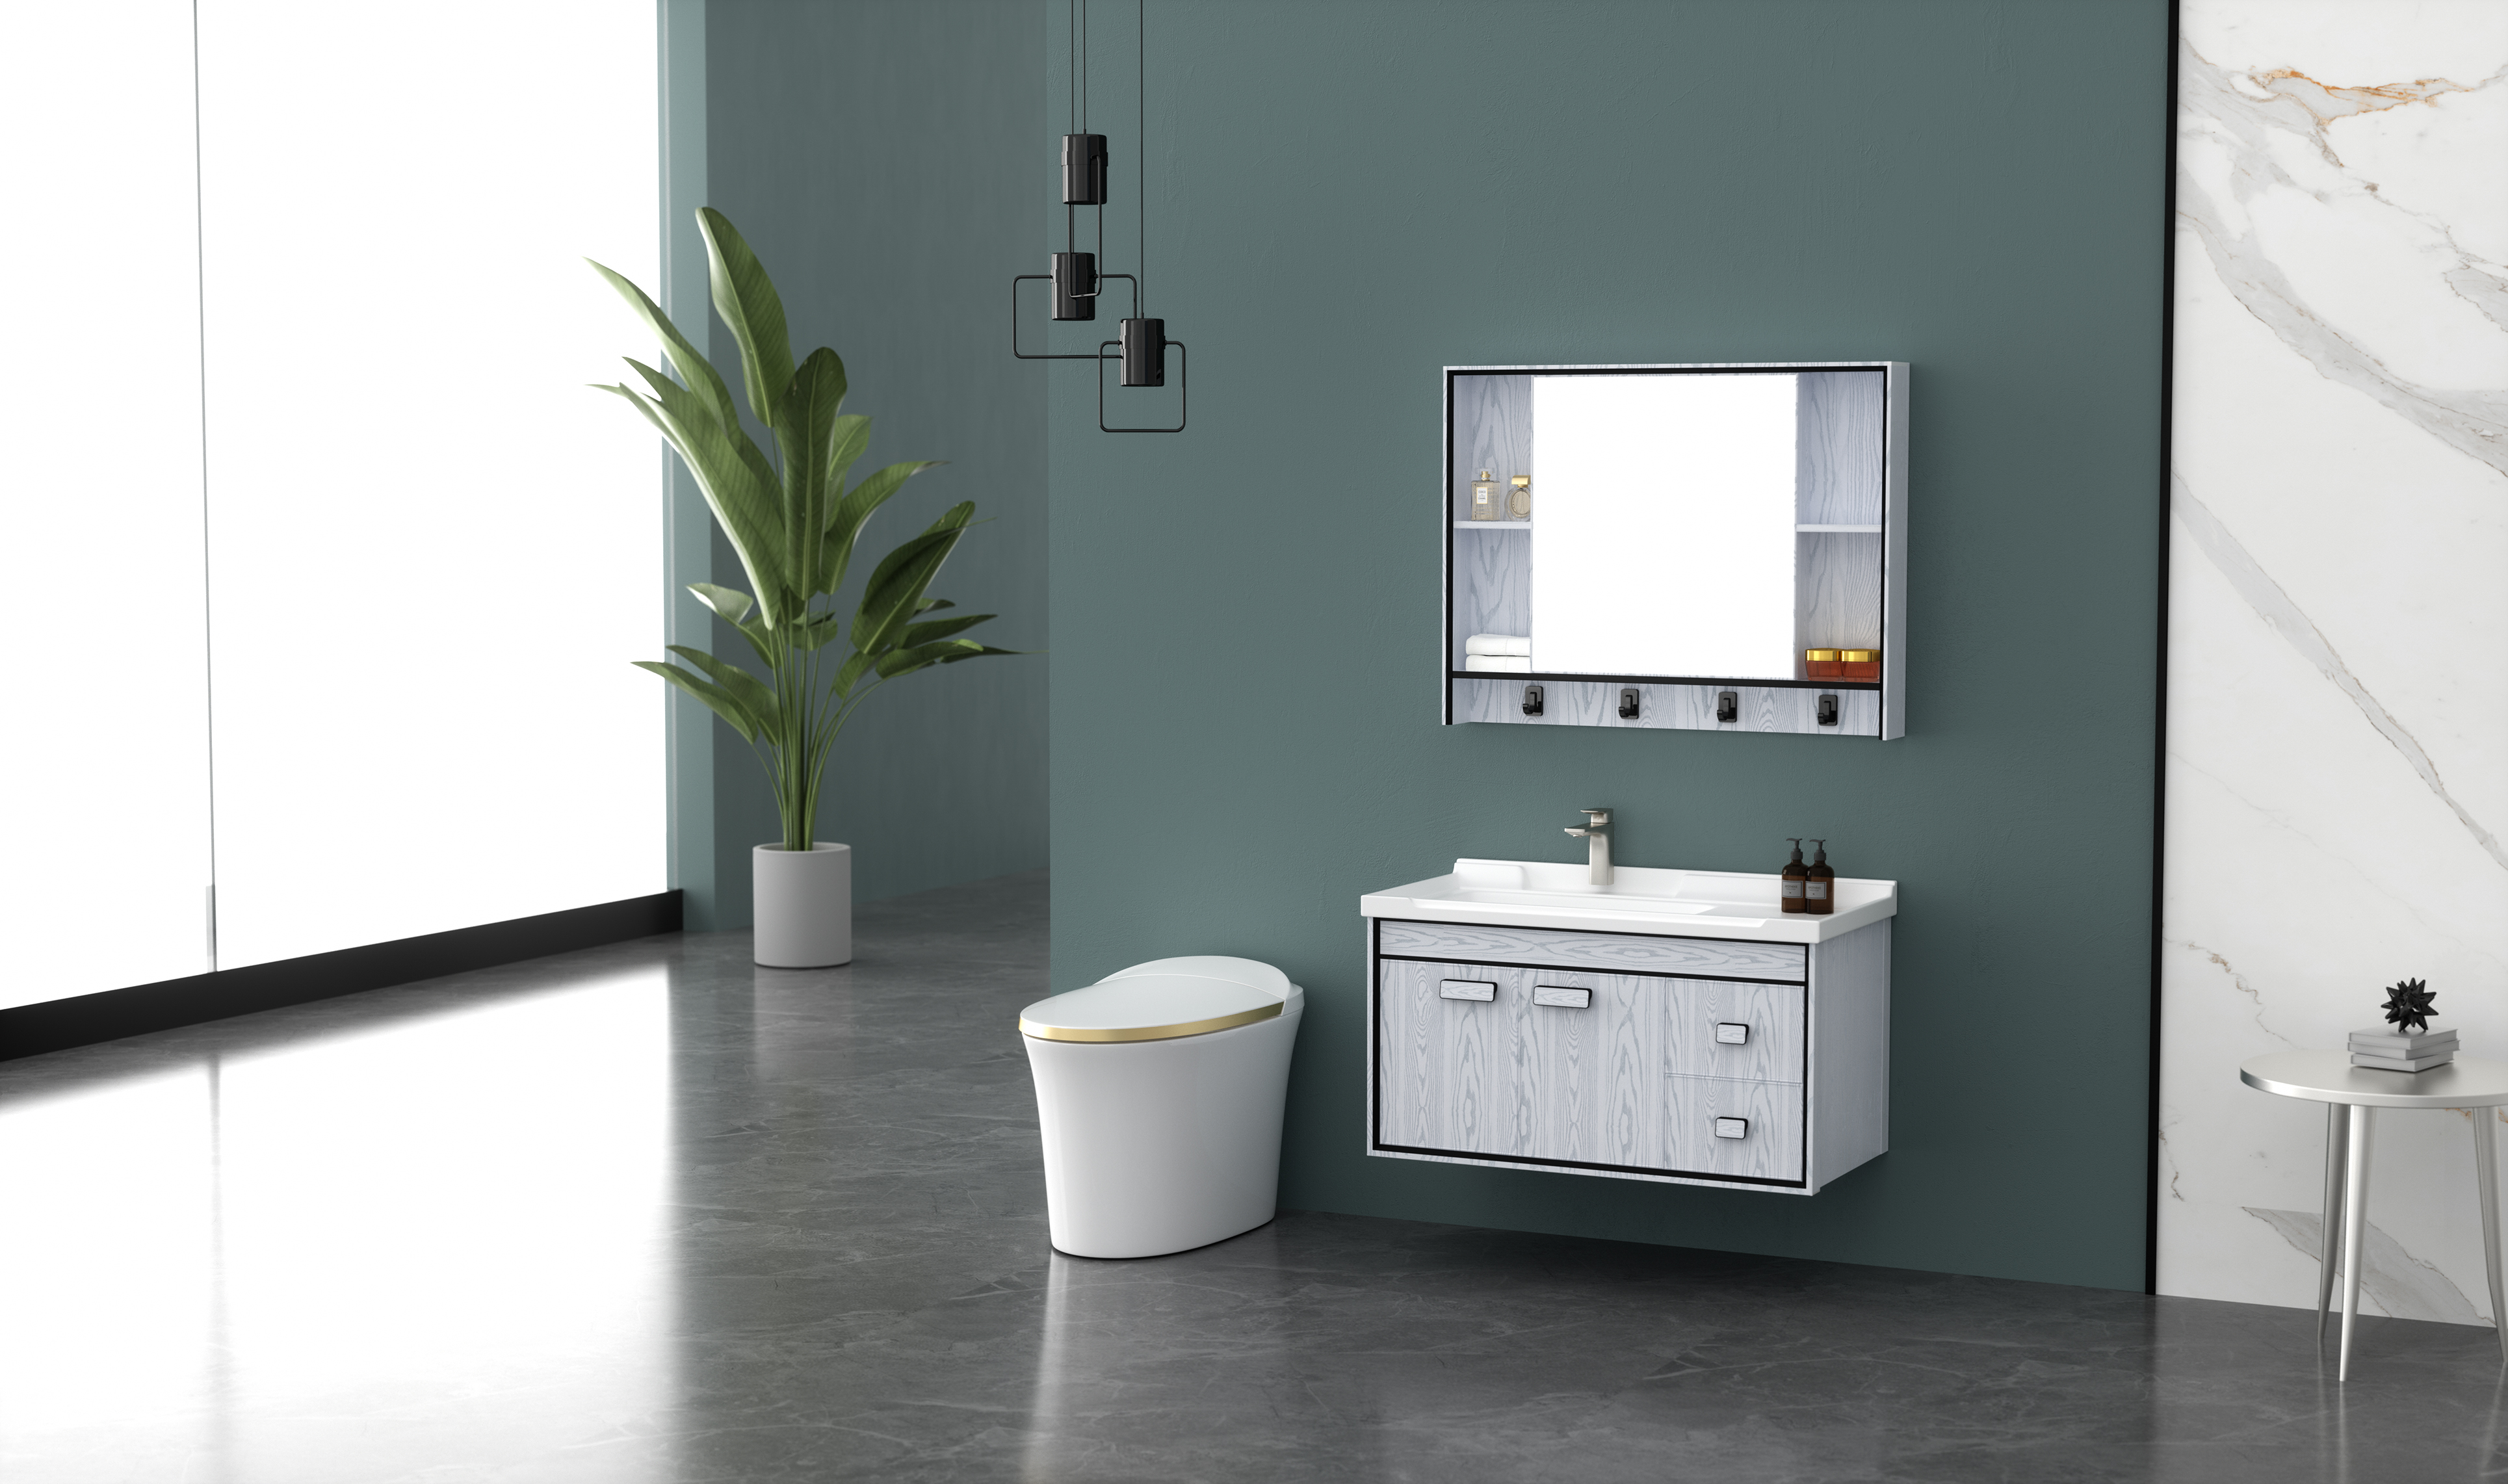 How to choose a sutiable bathroom wall cabinet